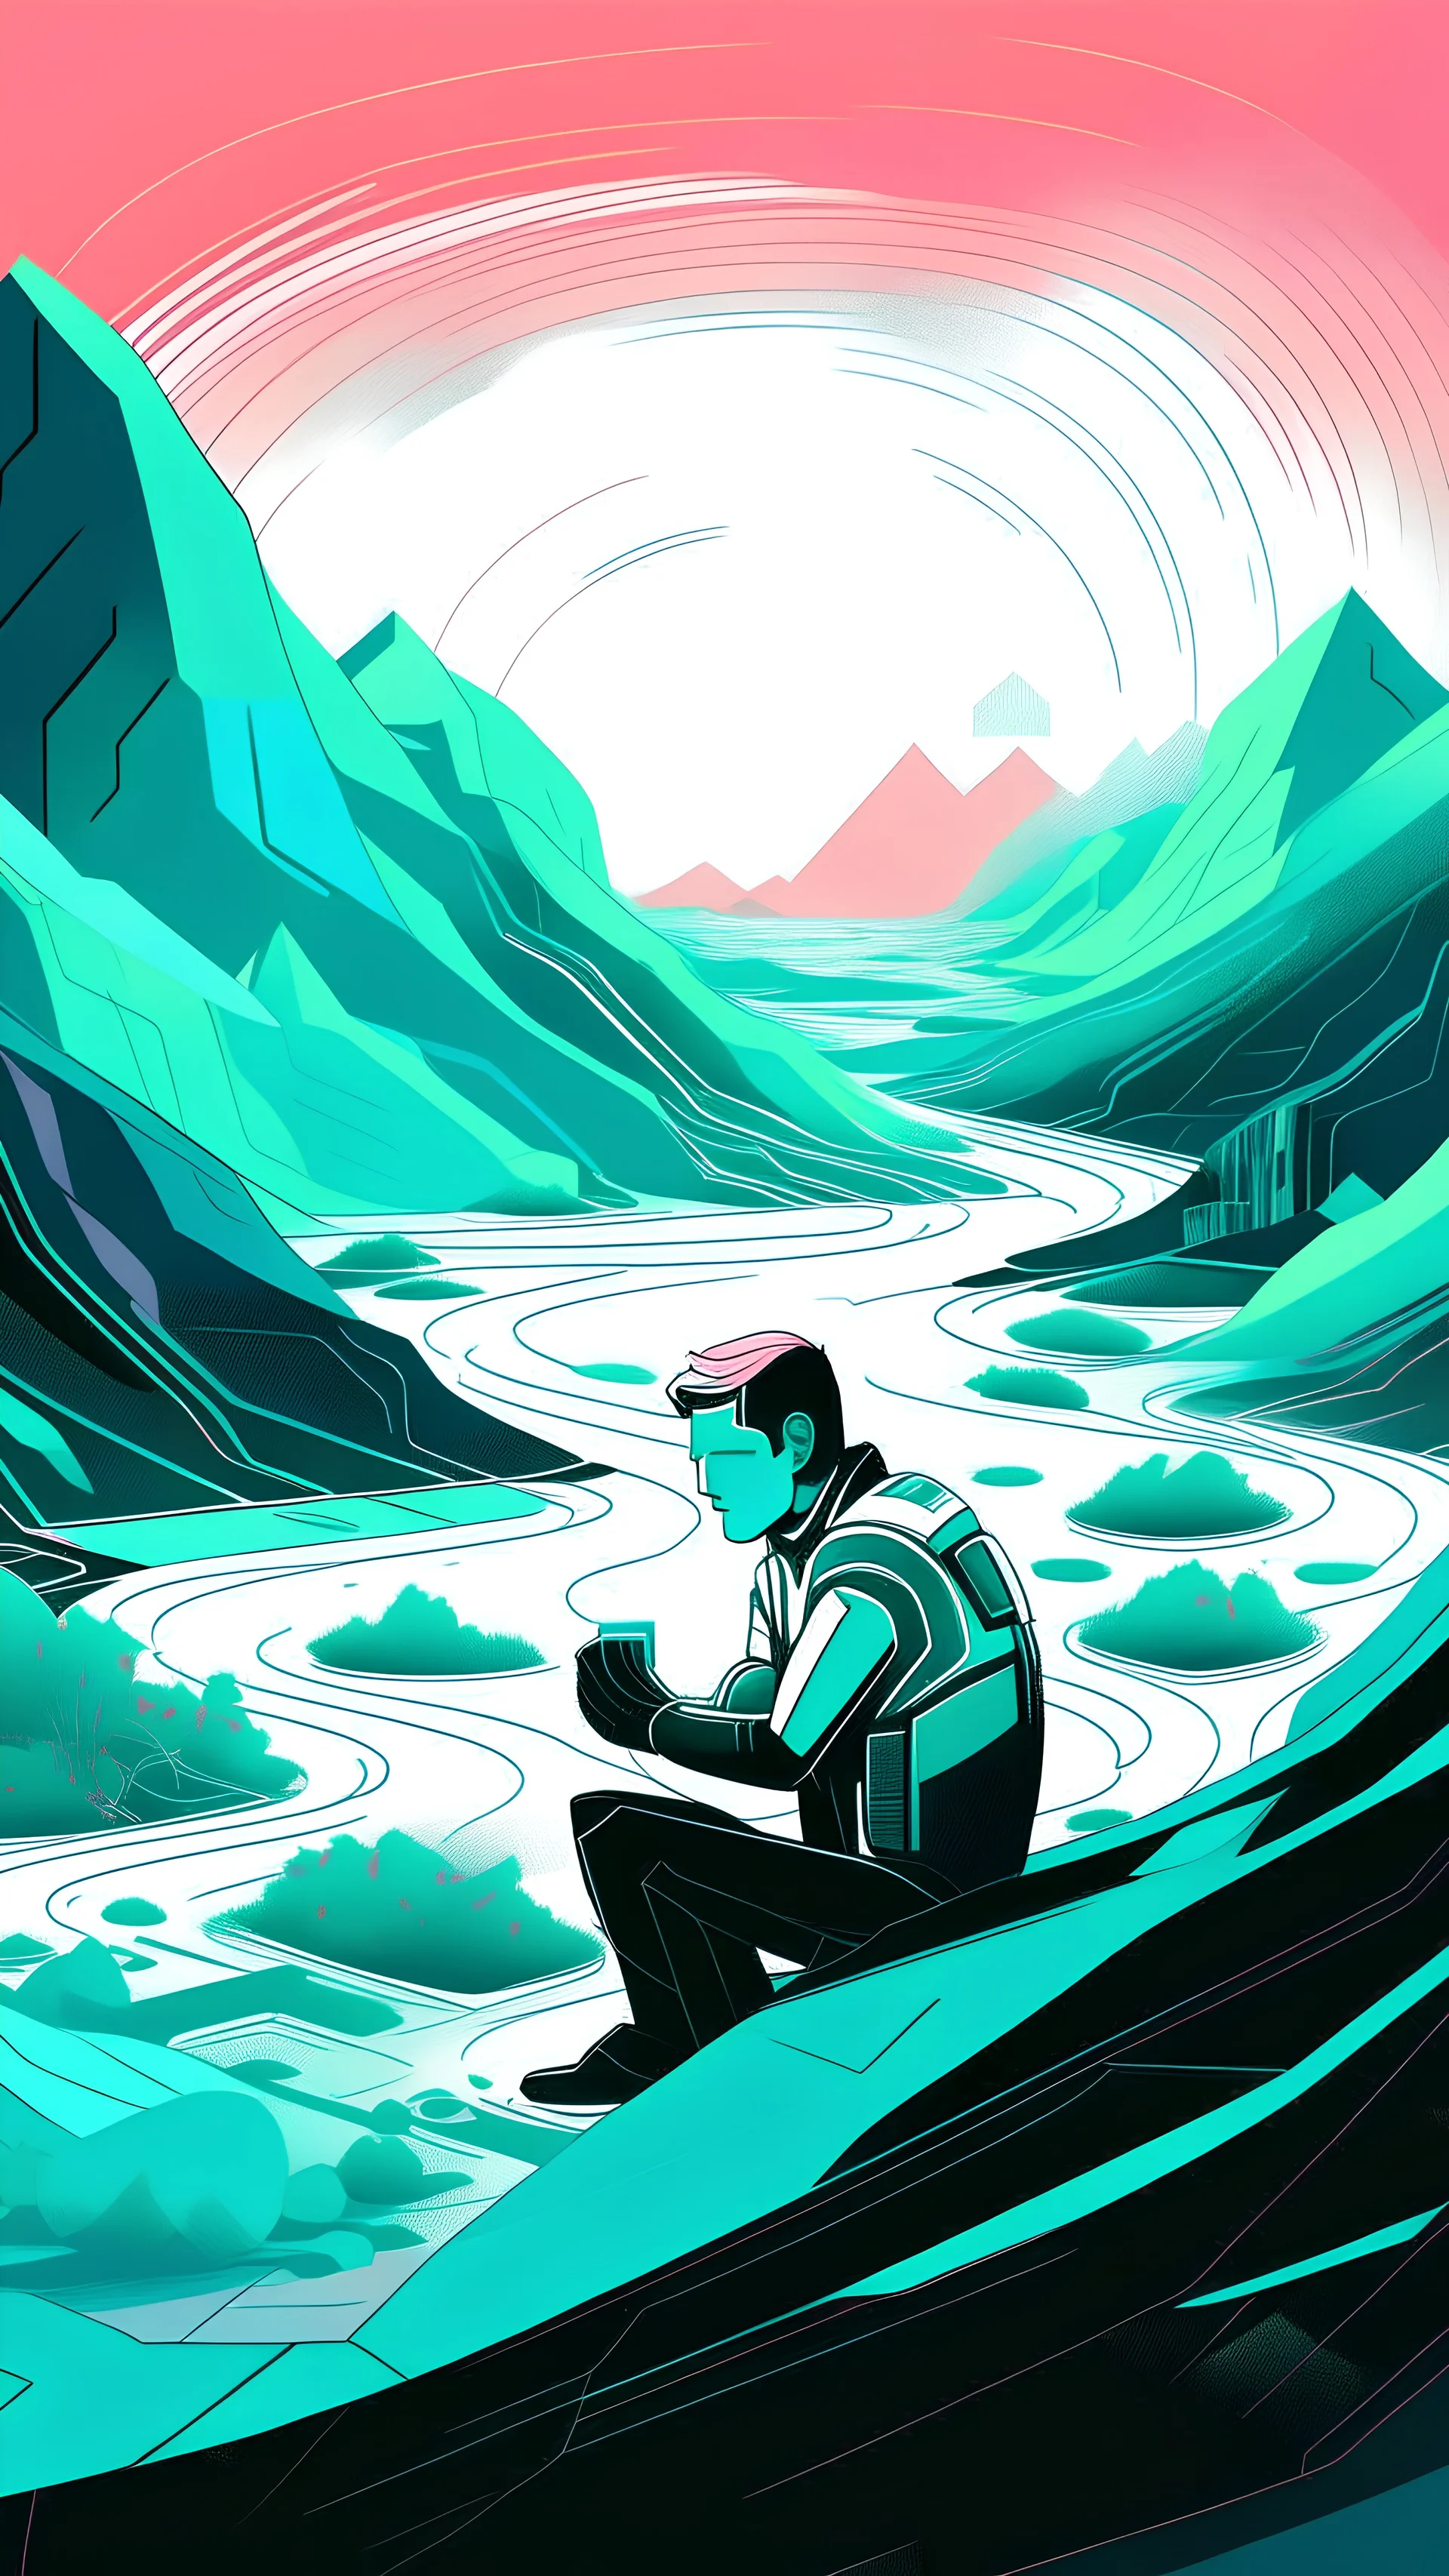 Futuristic serigraphy of a man surround by a digital landscape.